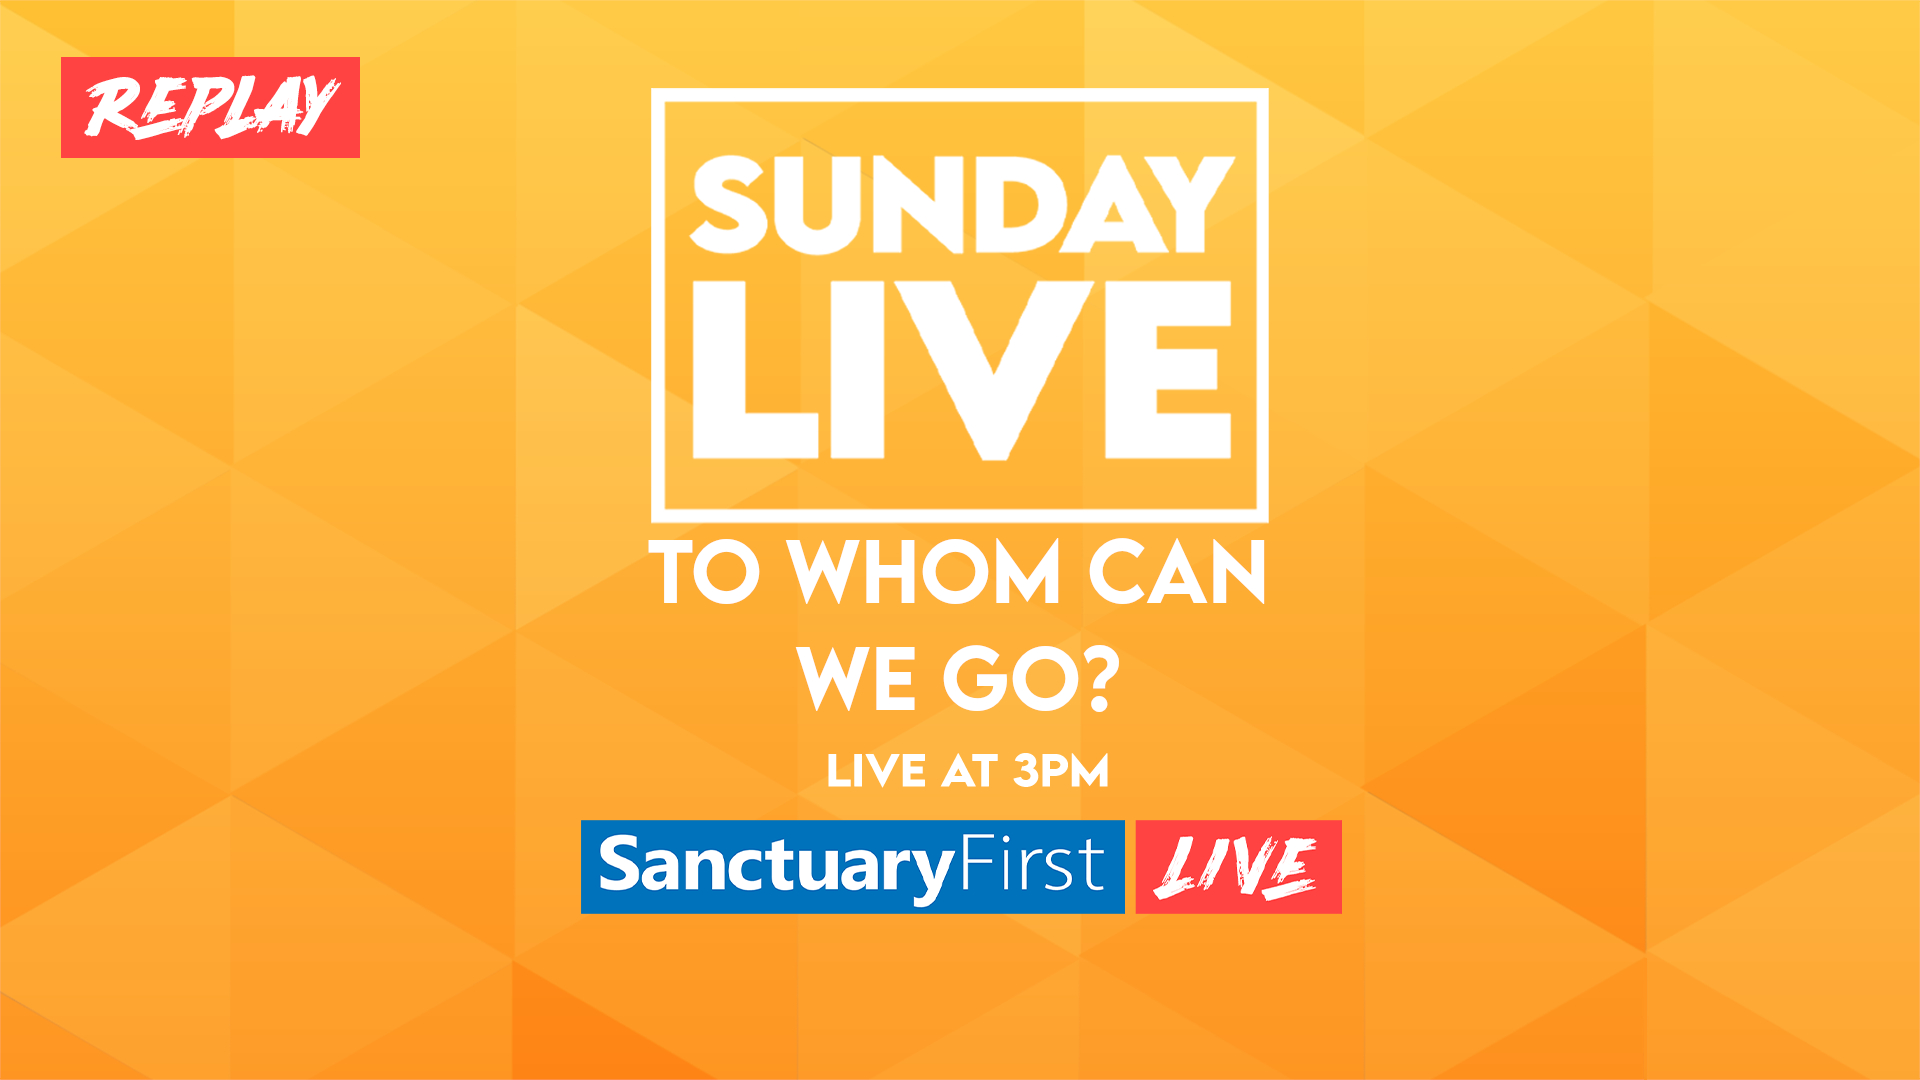 Sunday Live - To whom can we go?